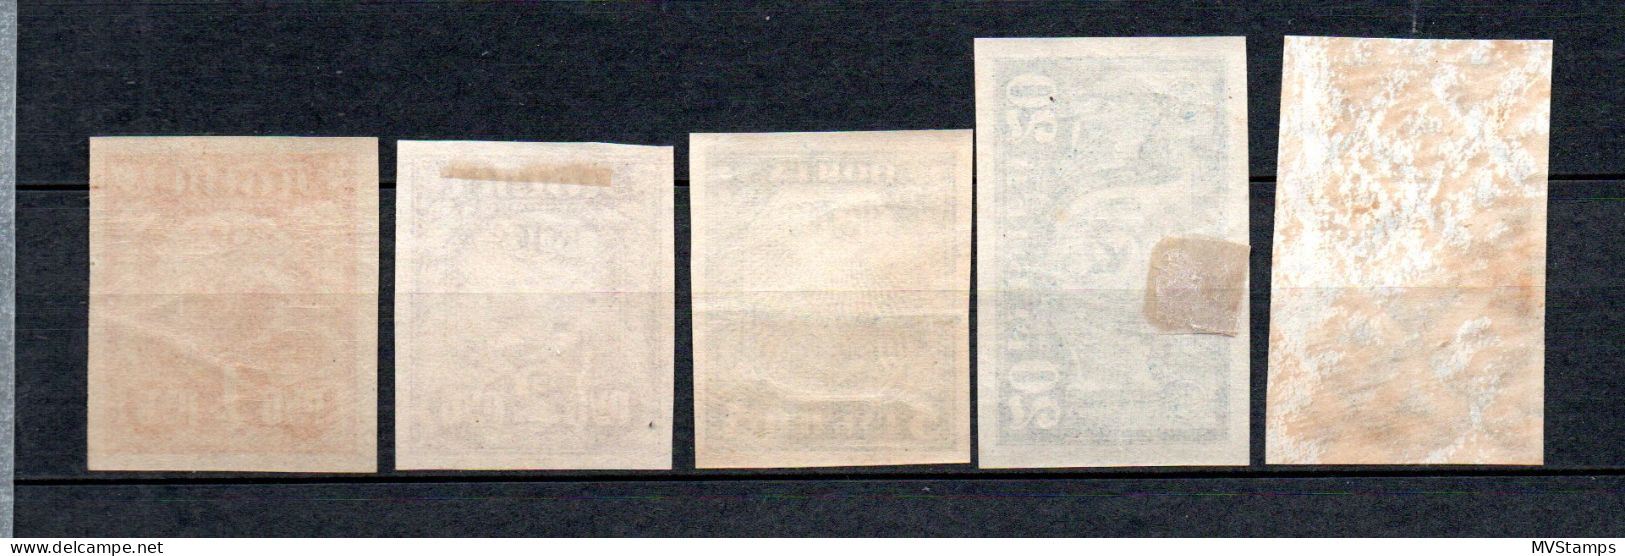 Russia 1921 Old Set Definitives Stamps (Michel 151/55) Nice MLH - Unused Stamps